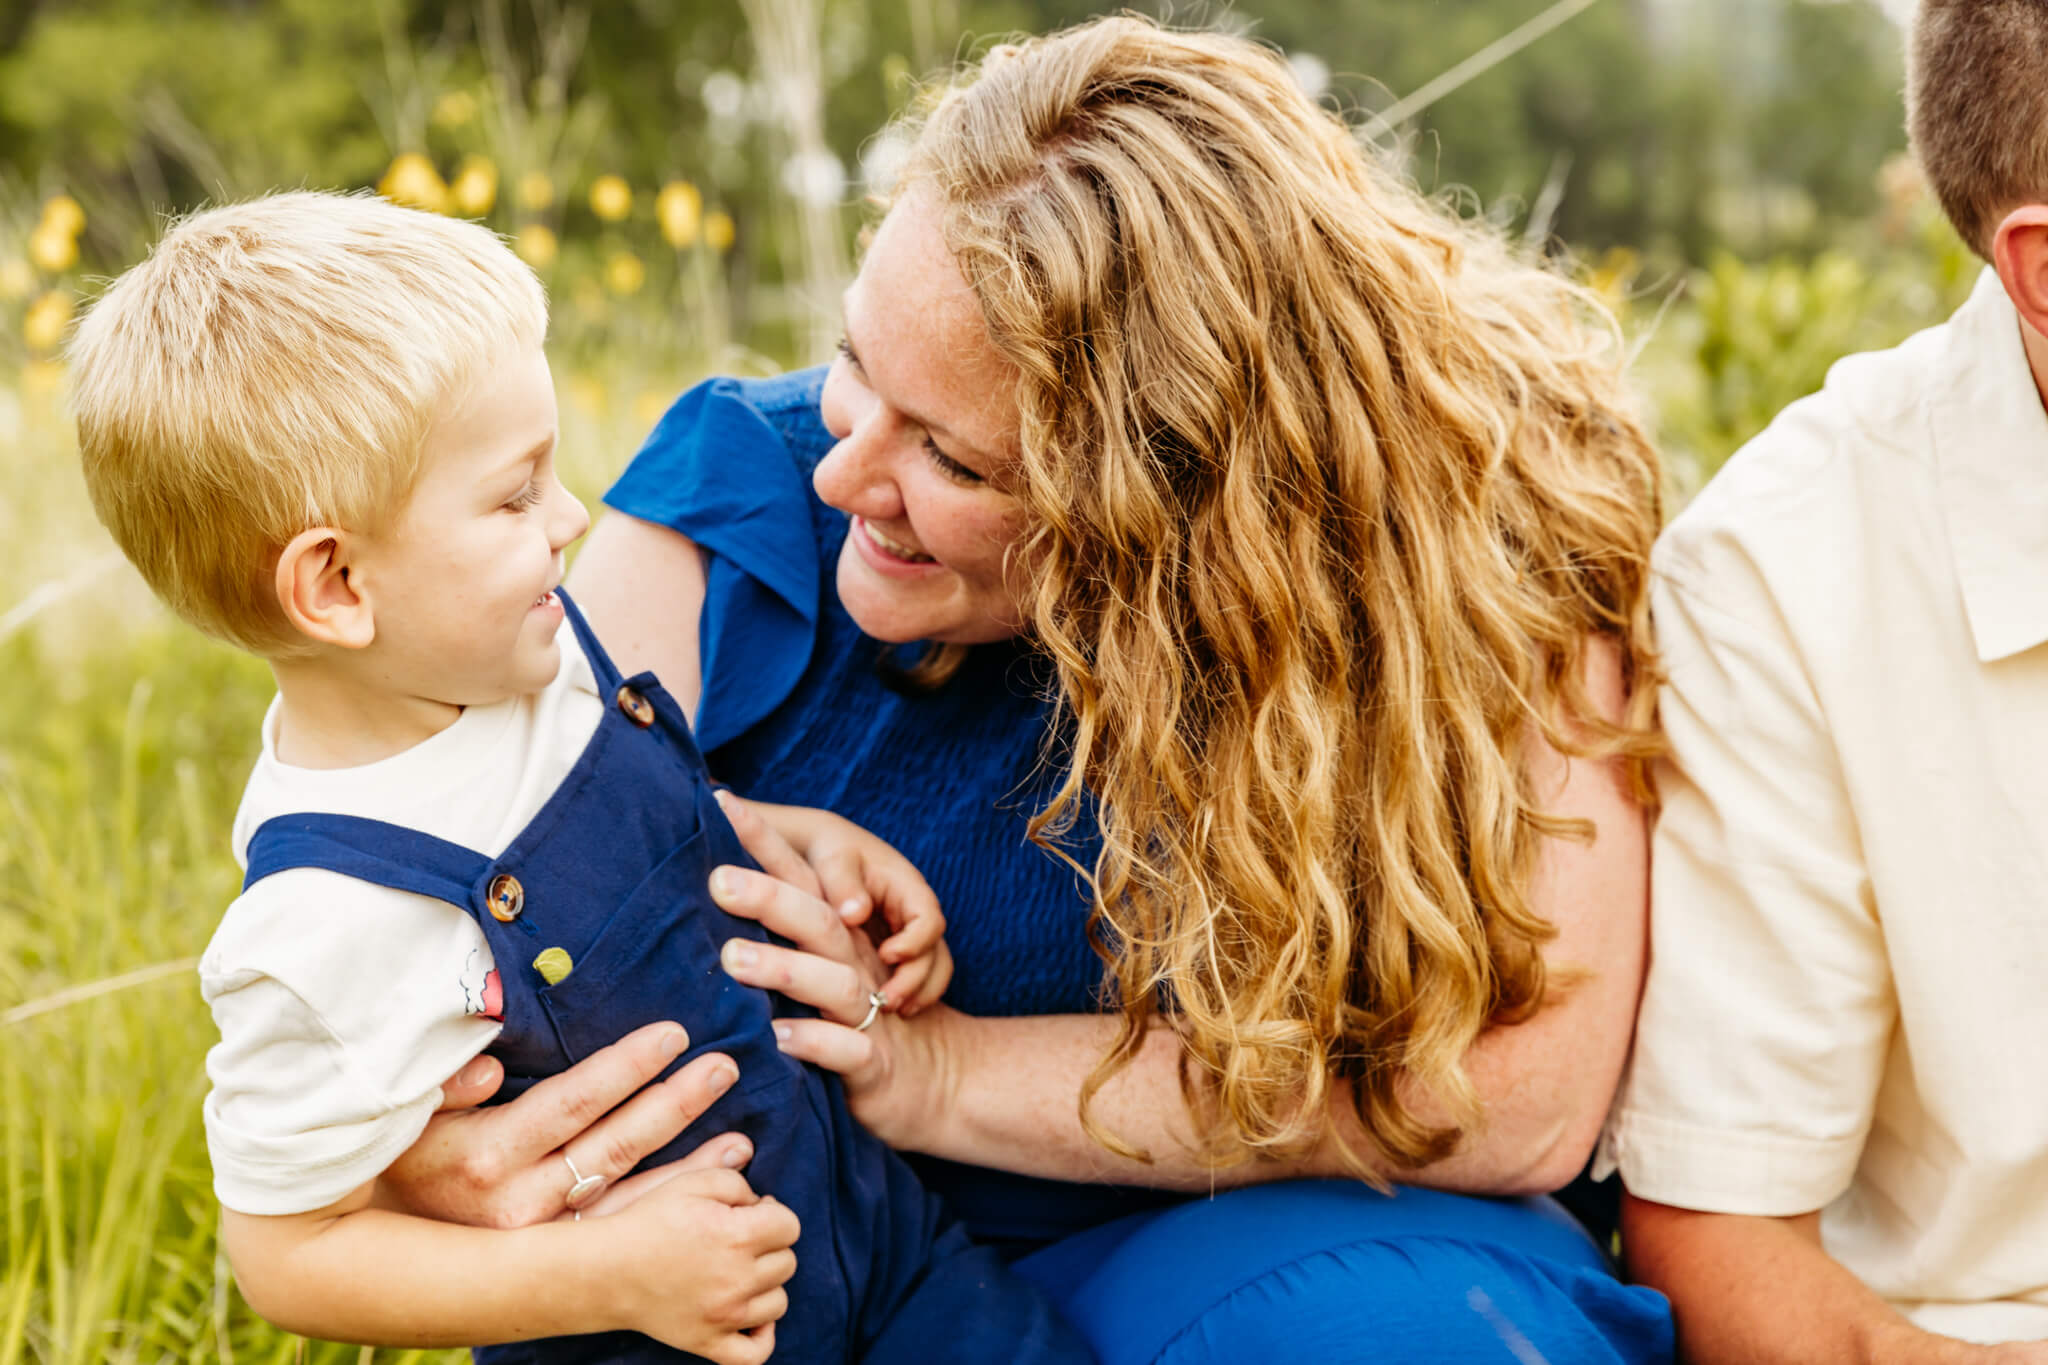 mama in blue dress tickling her son in blue overalls as they laugh together